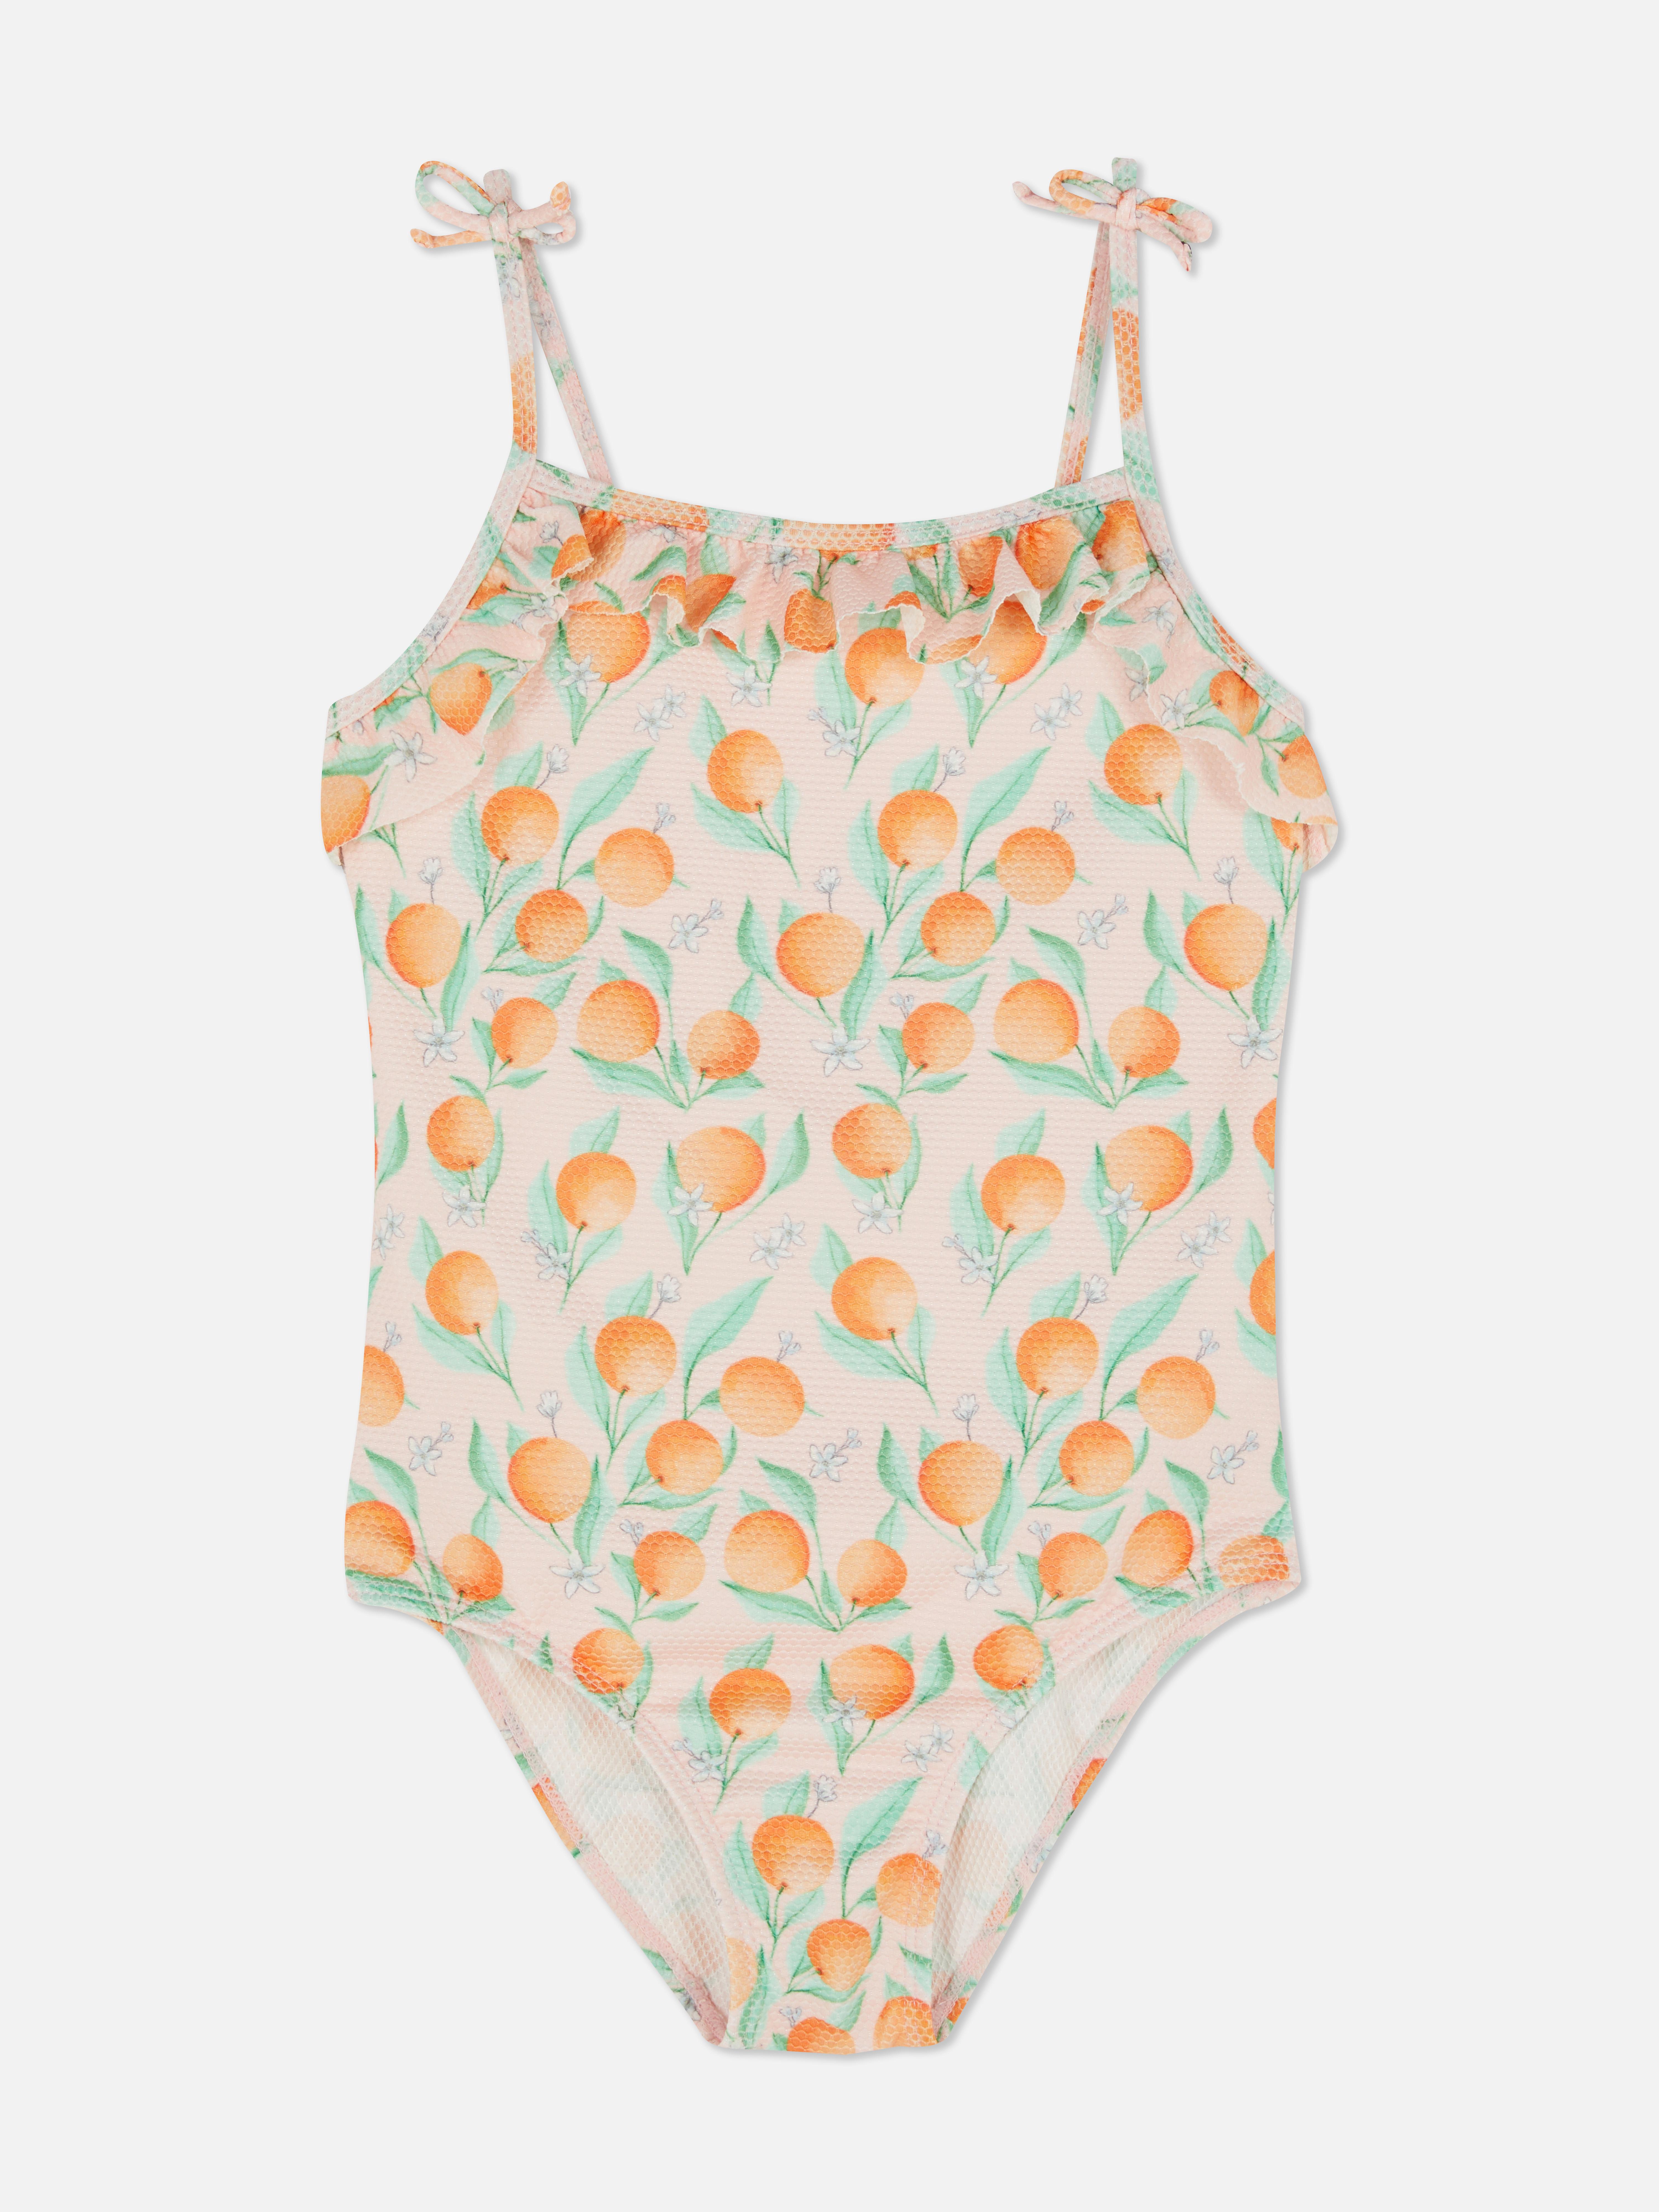 Stacey Solomon Printed Frill Swimsuit